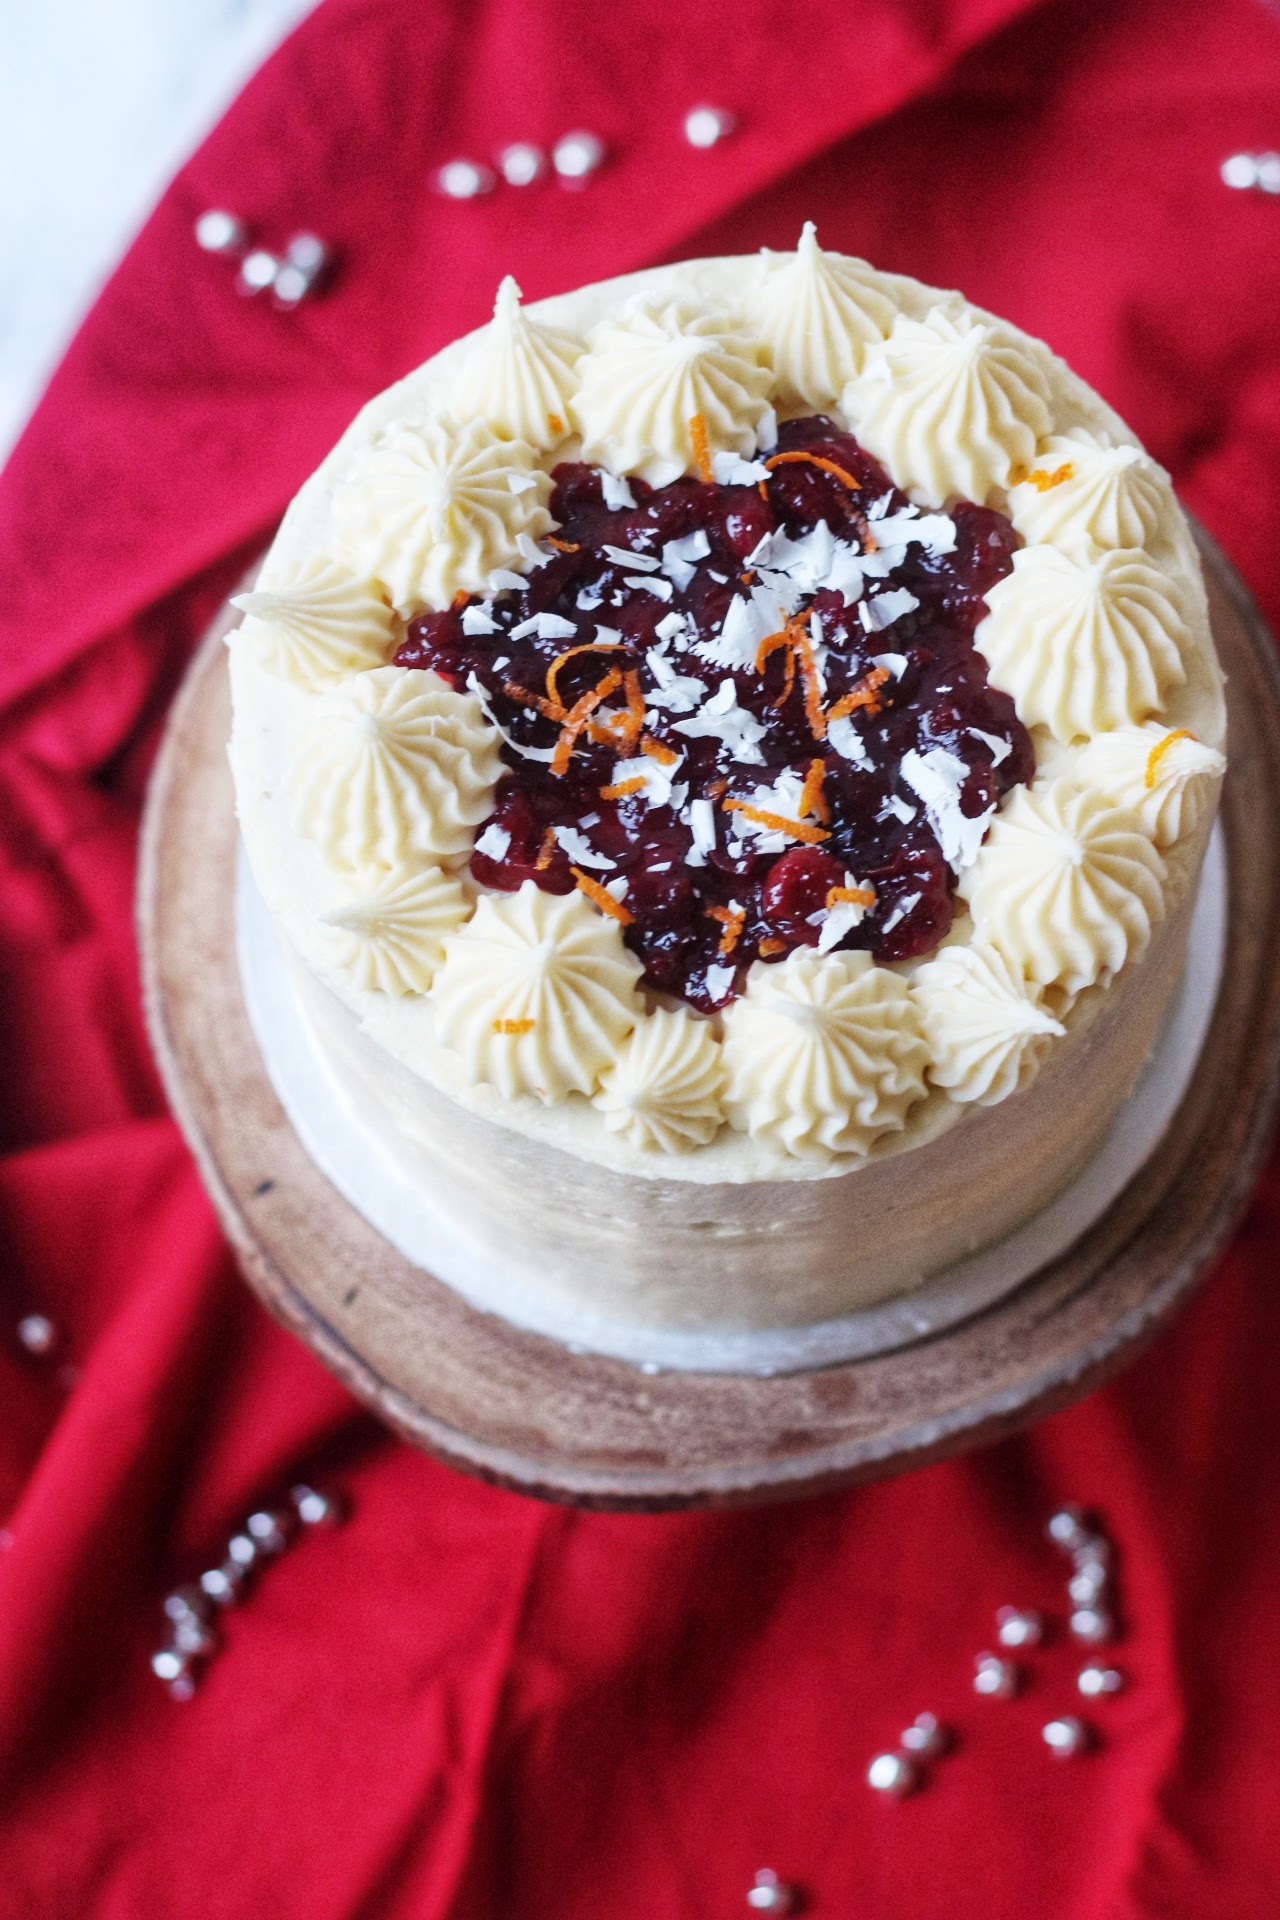 https://supperinthesuburbs.com/wp-content/uploads/2021/12/Vegan-White-Chocolate-and-Cranberry-Cake-01.jpeg